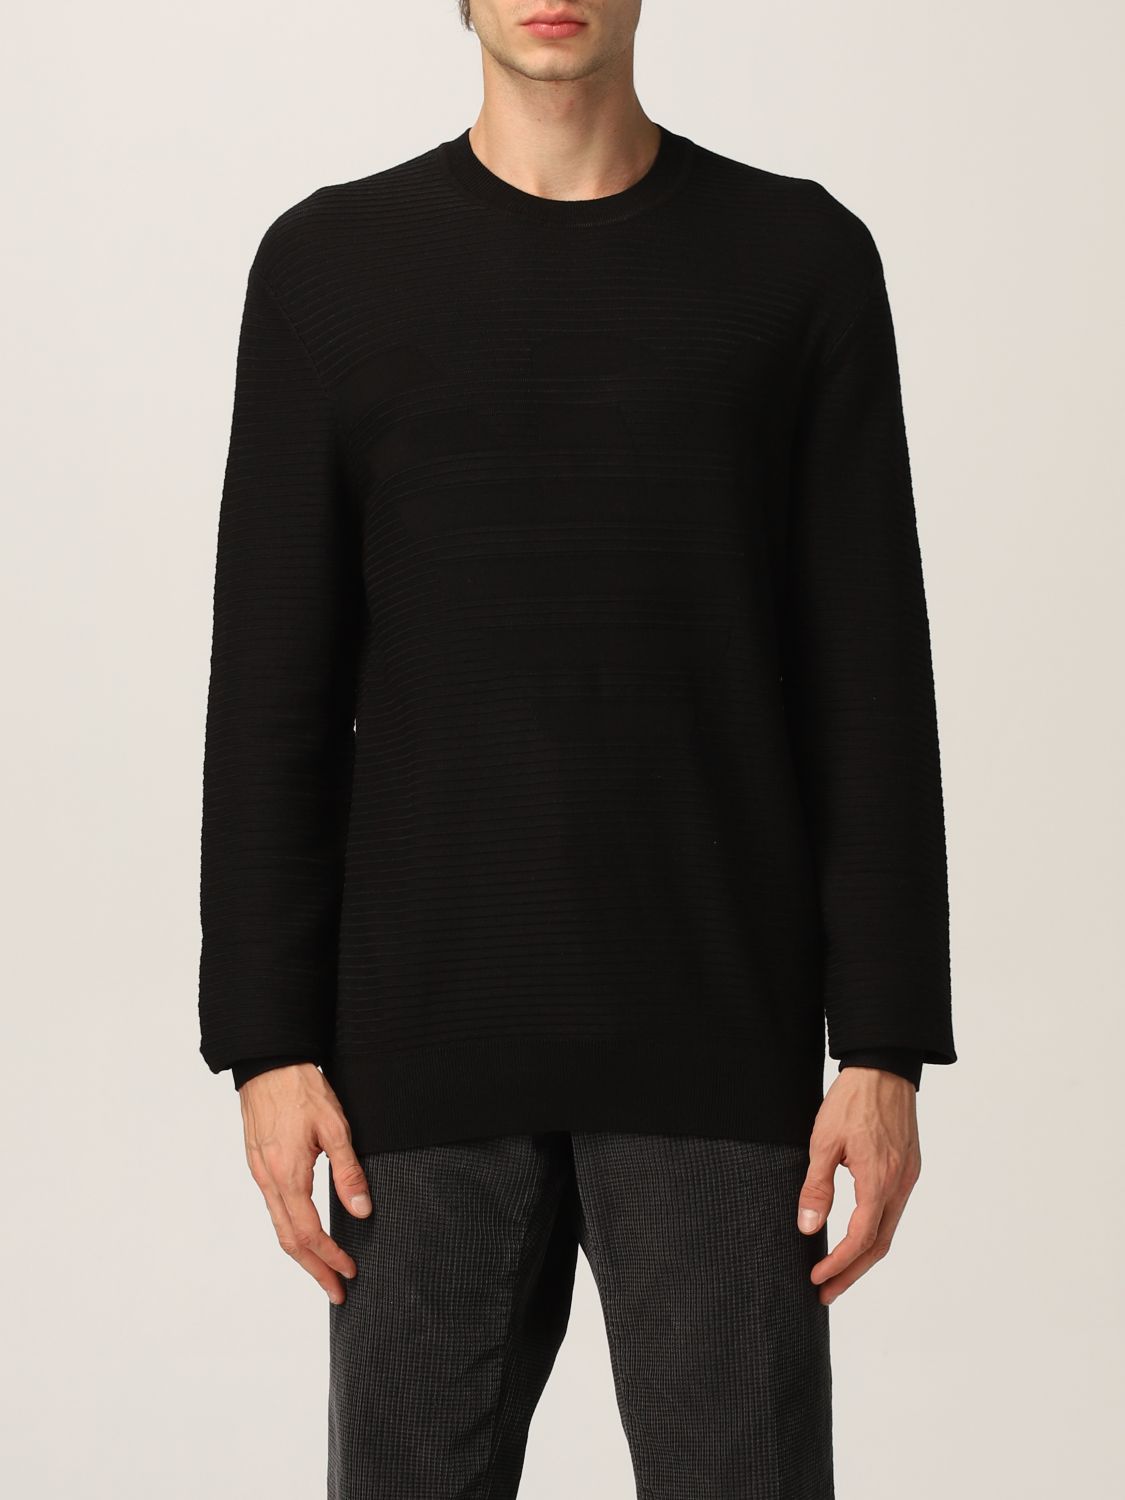 Emporio Armani Sweaters Offers Online, Save 60% 